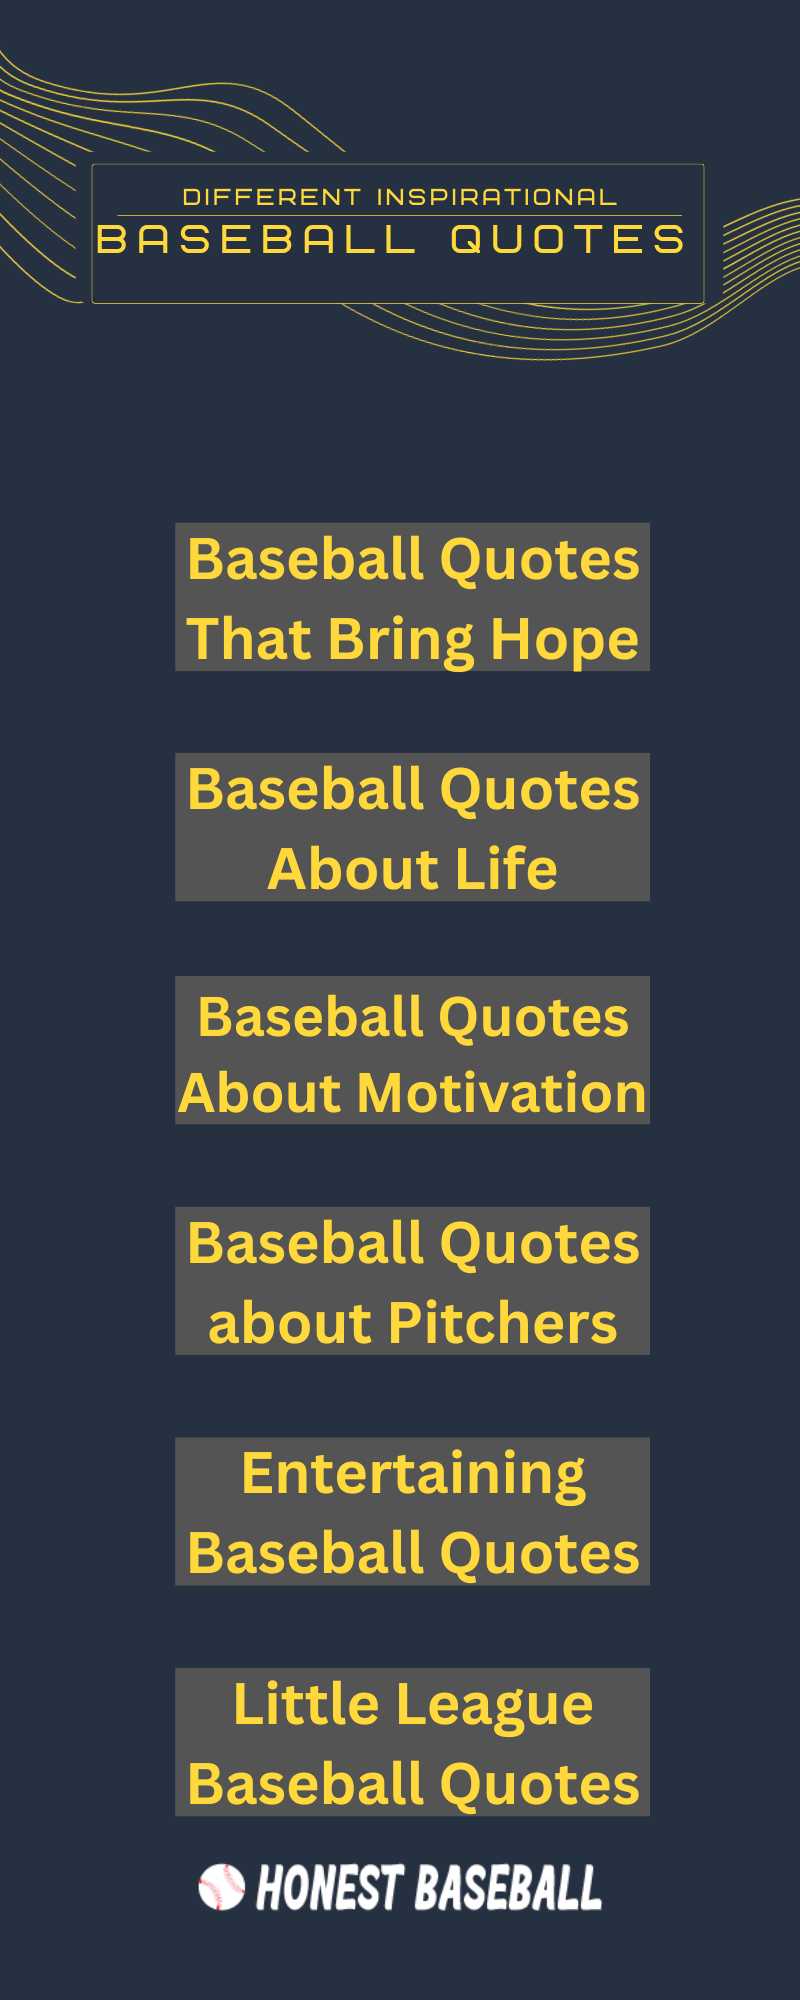 Different Inspirational Baseball Quotes